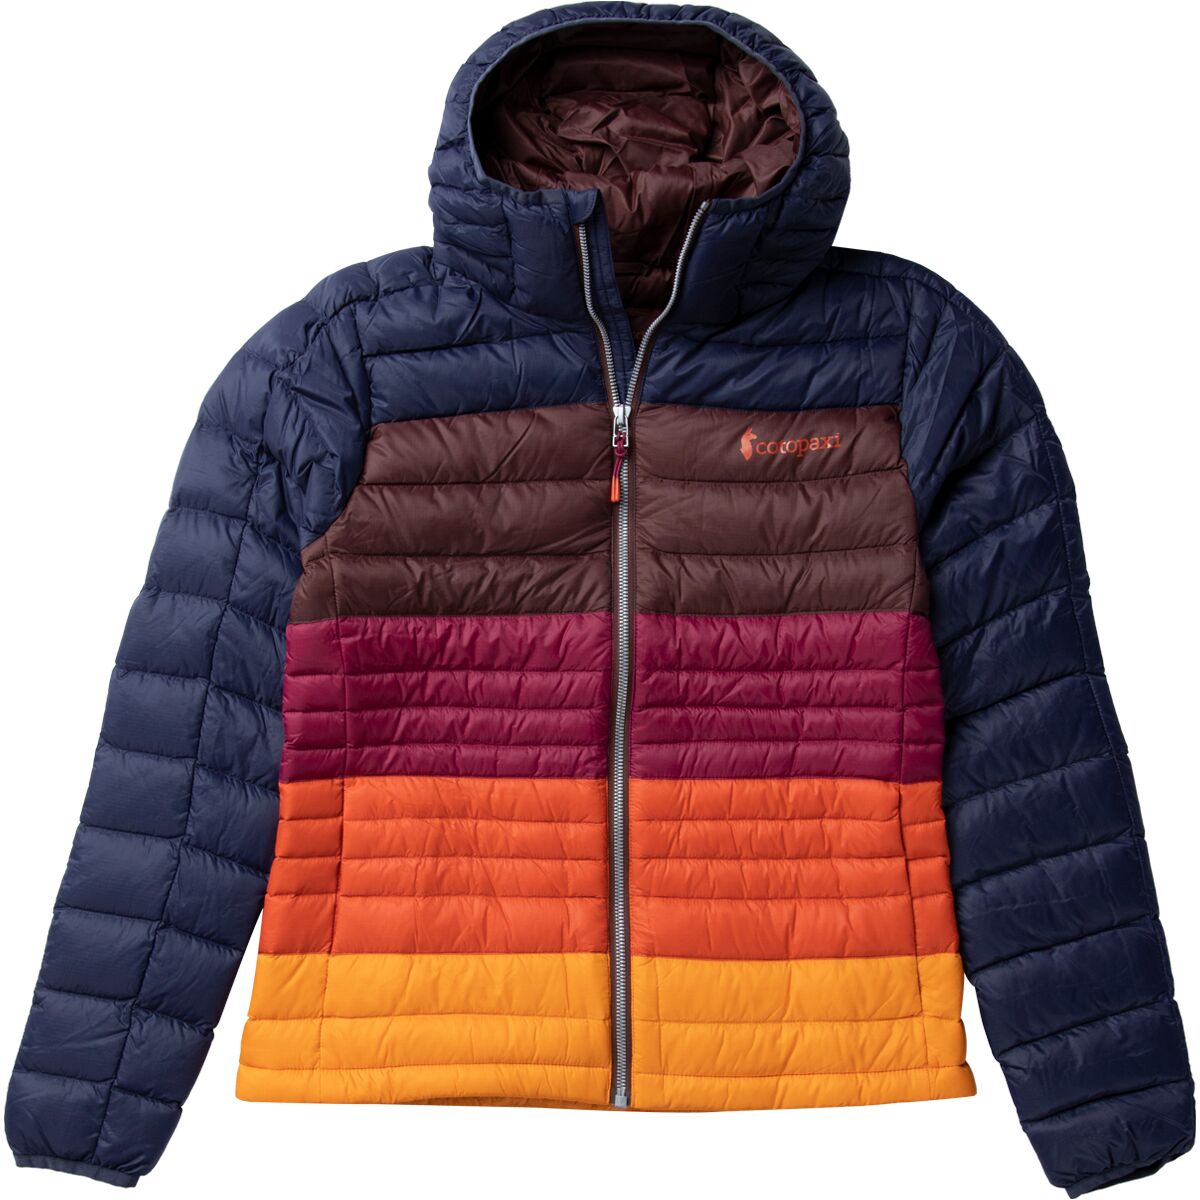 Cotopaxi Fuego Colorblock Down Hooded Jacket - Women's - Clothing